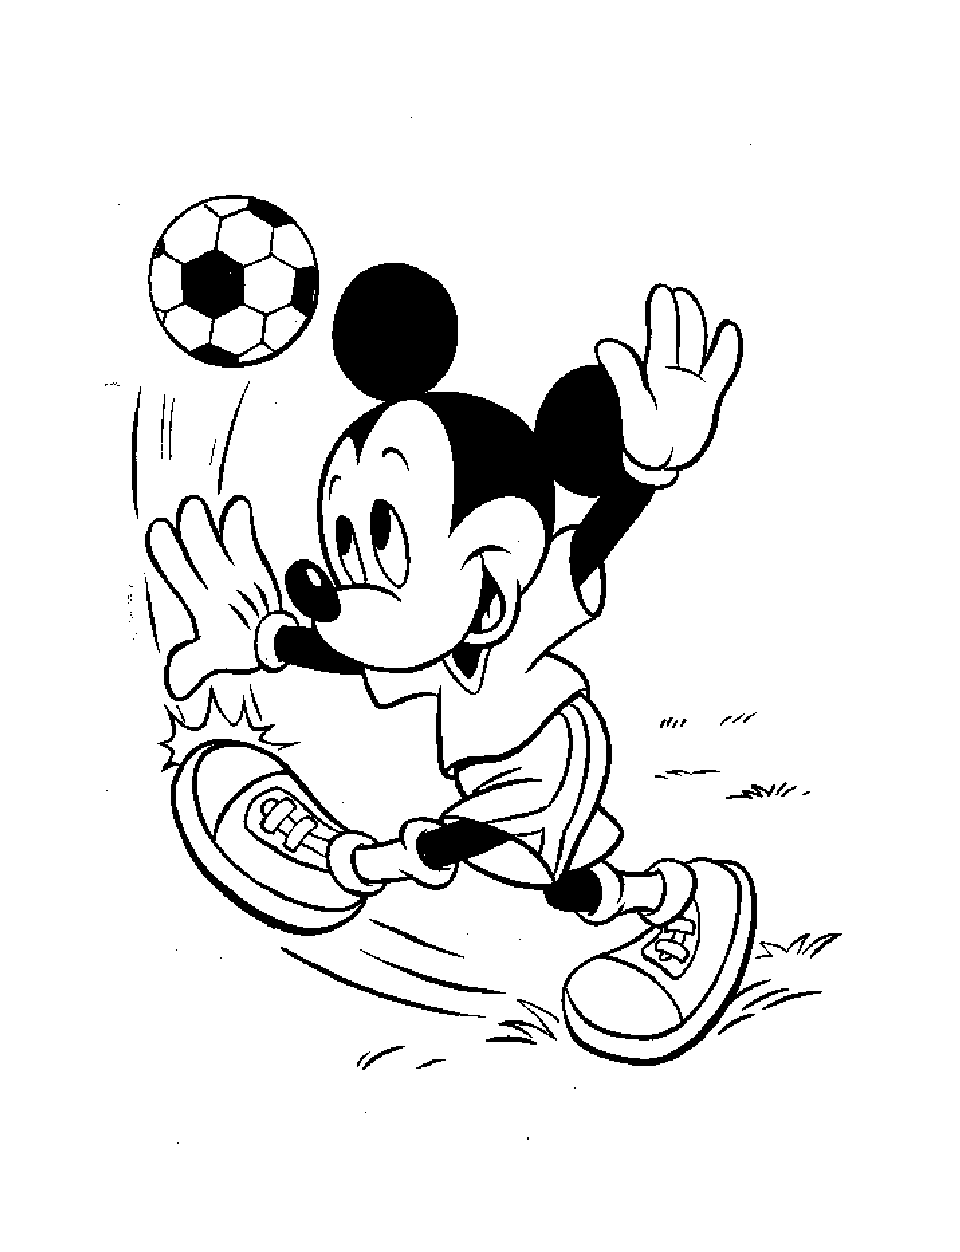 Mickey, the Disney mascot playing soccer